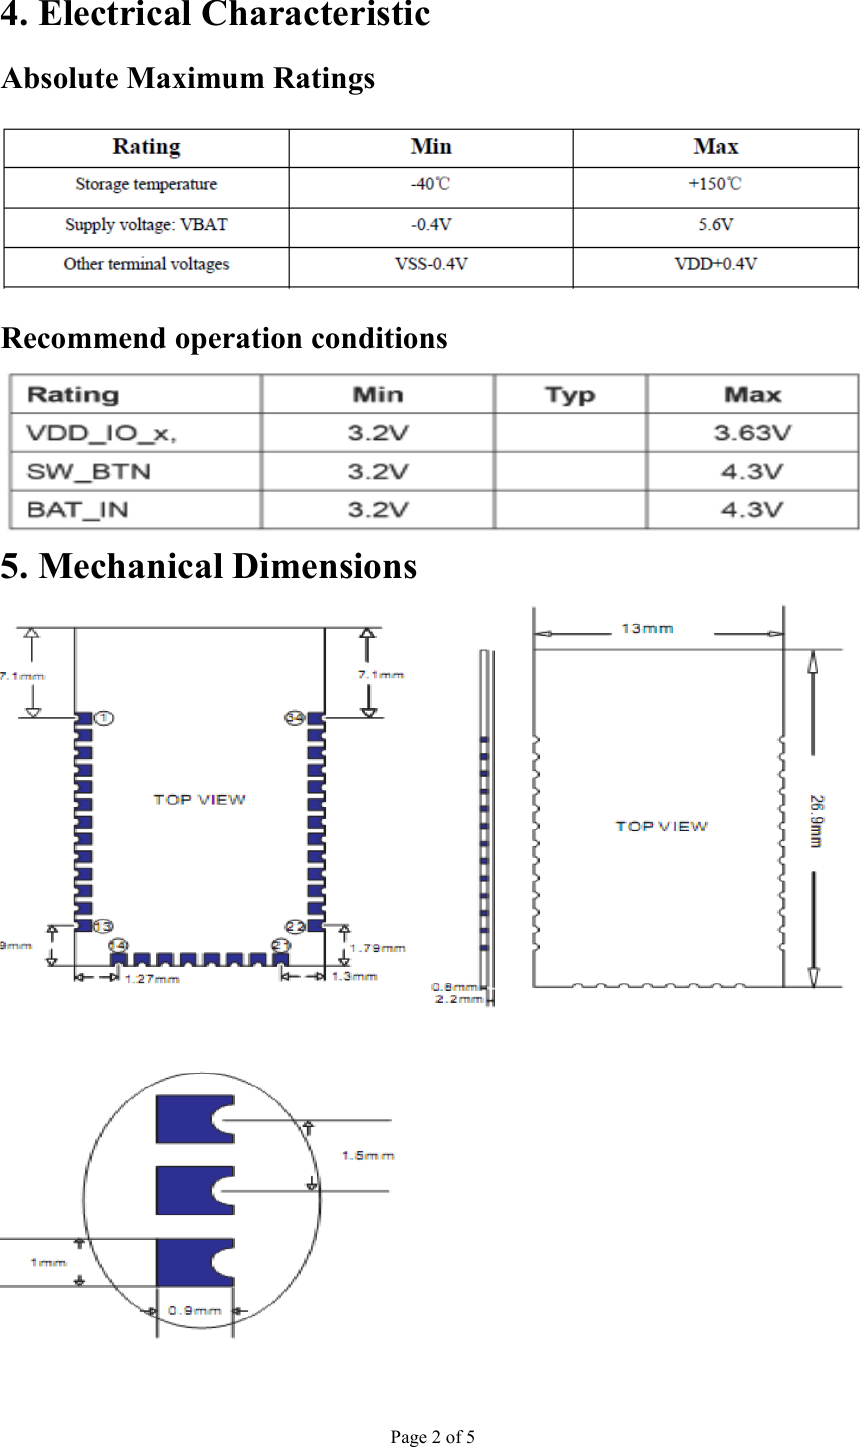 Page 2 of 5  4. Electrical Characteristic Absolute Maximum Ratings  Recommend operation conditions  5. Mechanical Dimensions  